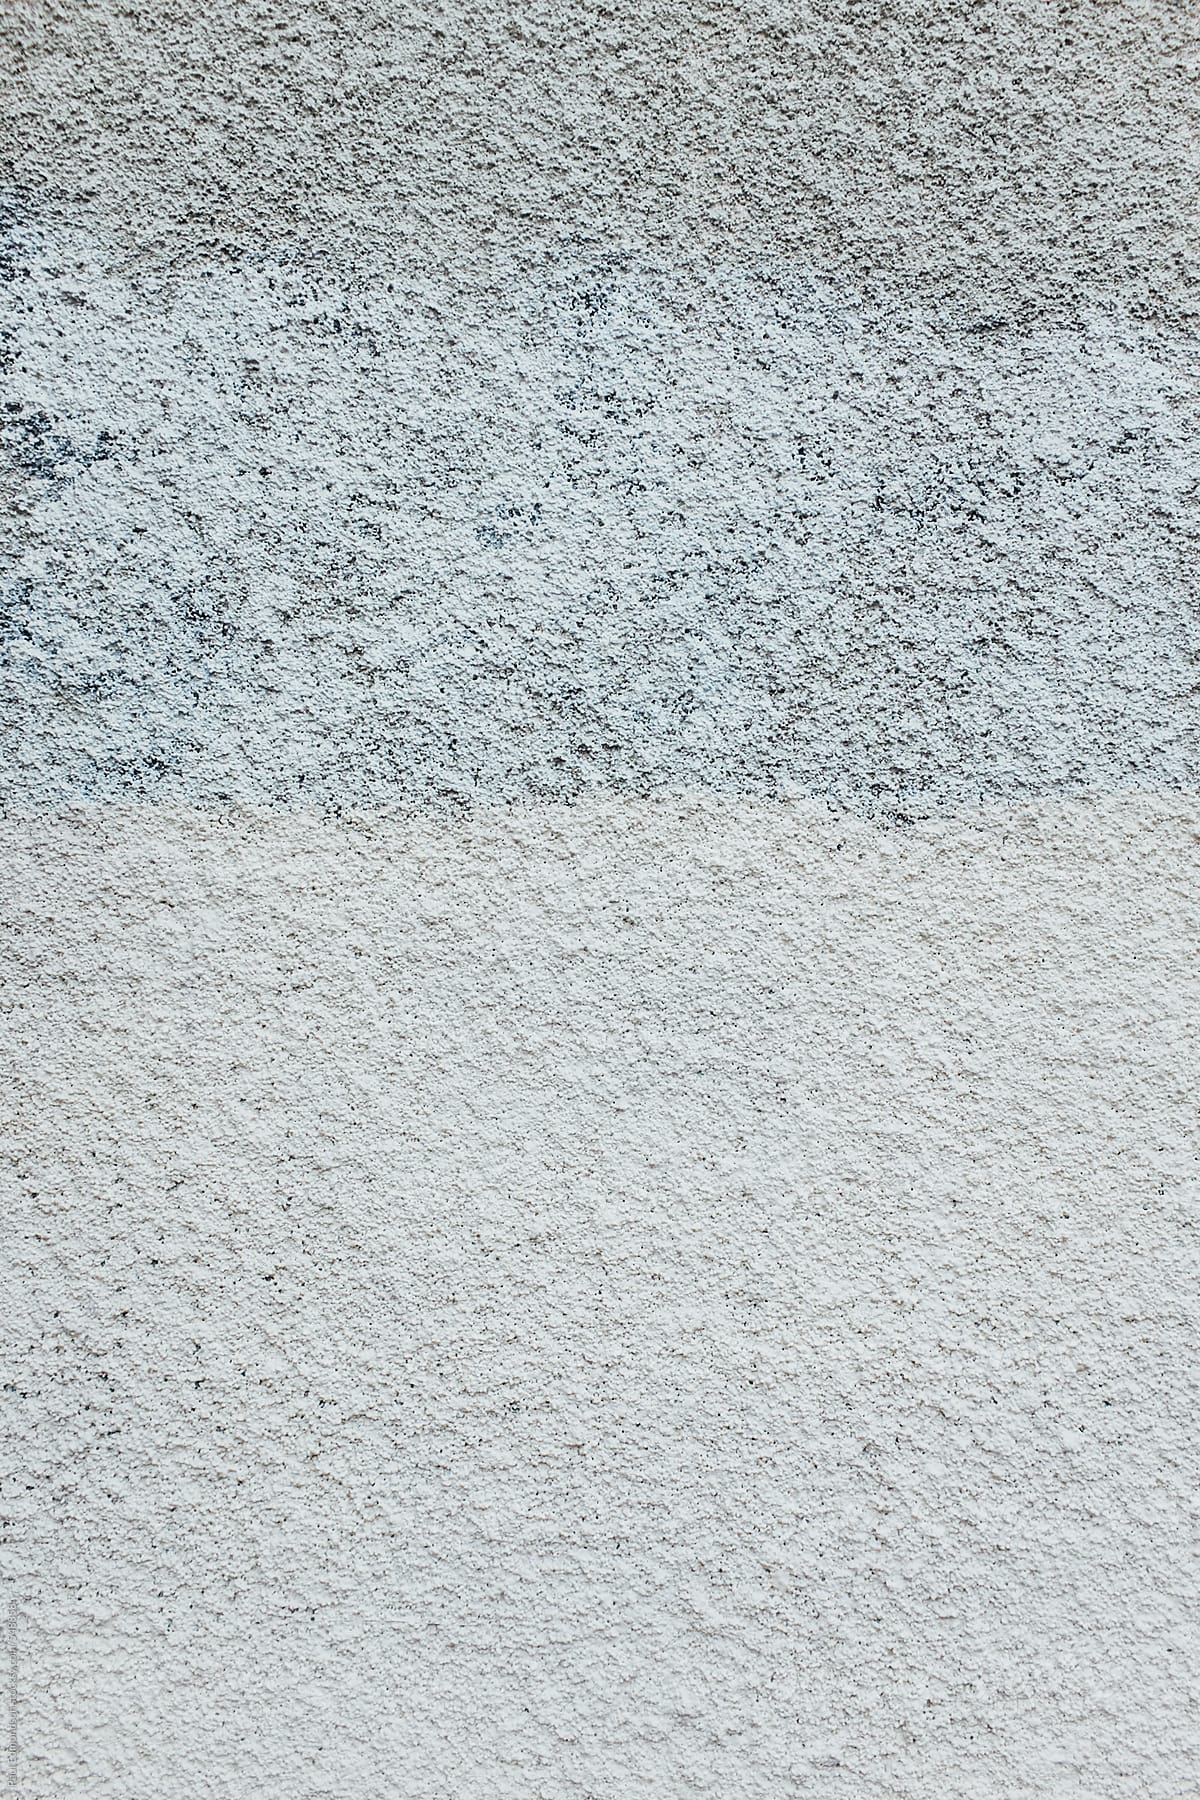 Close up of paint covering stucco wall